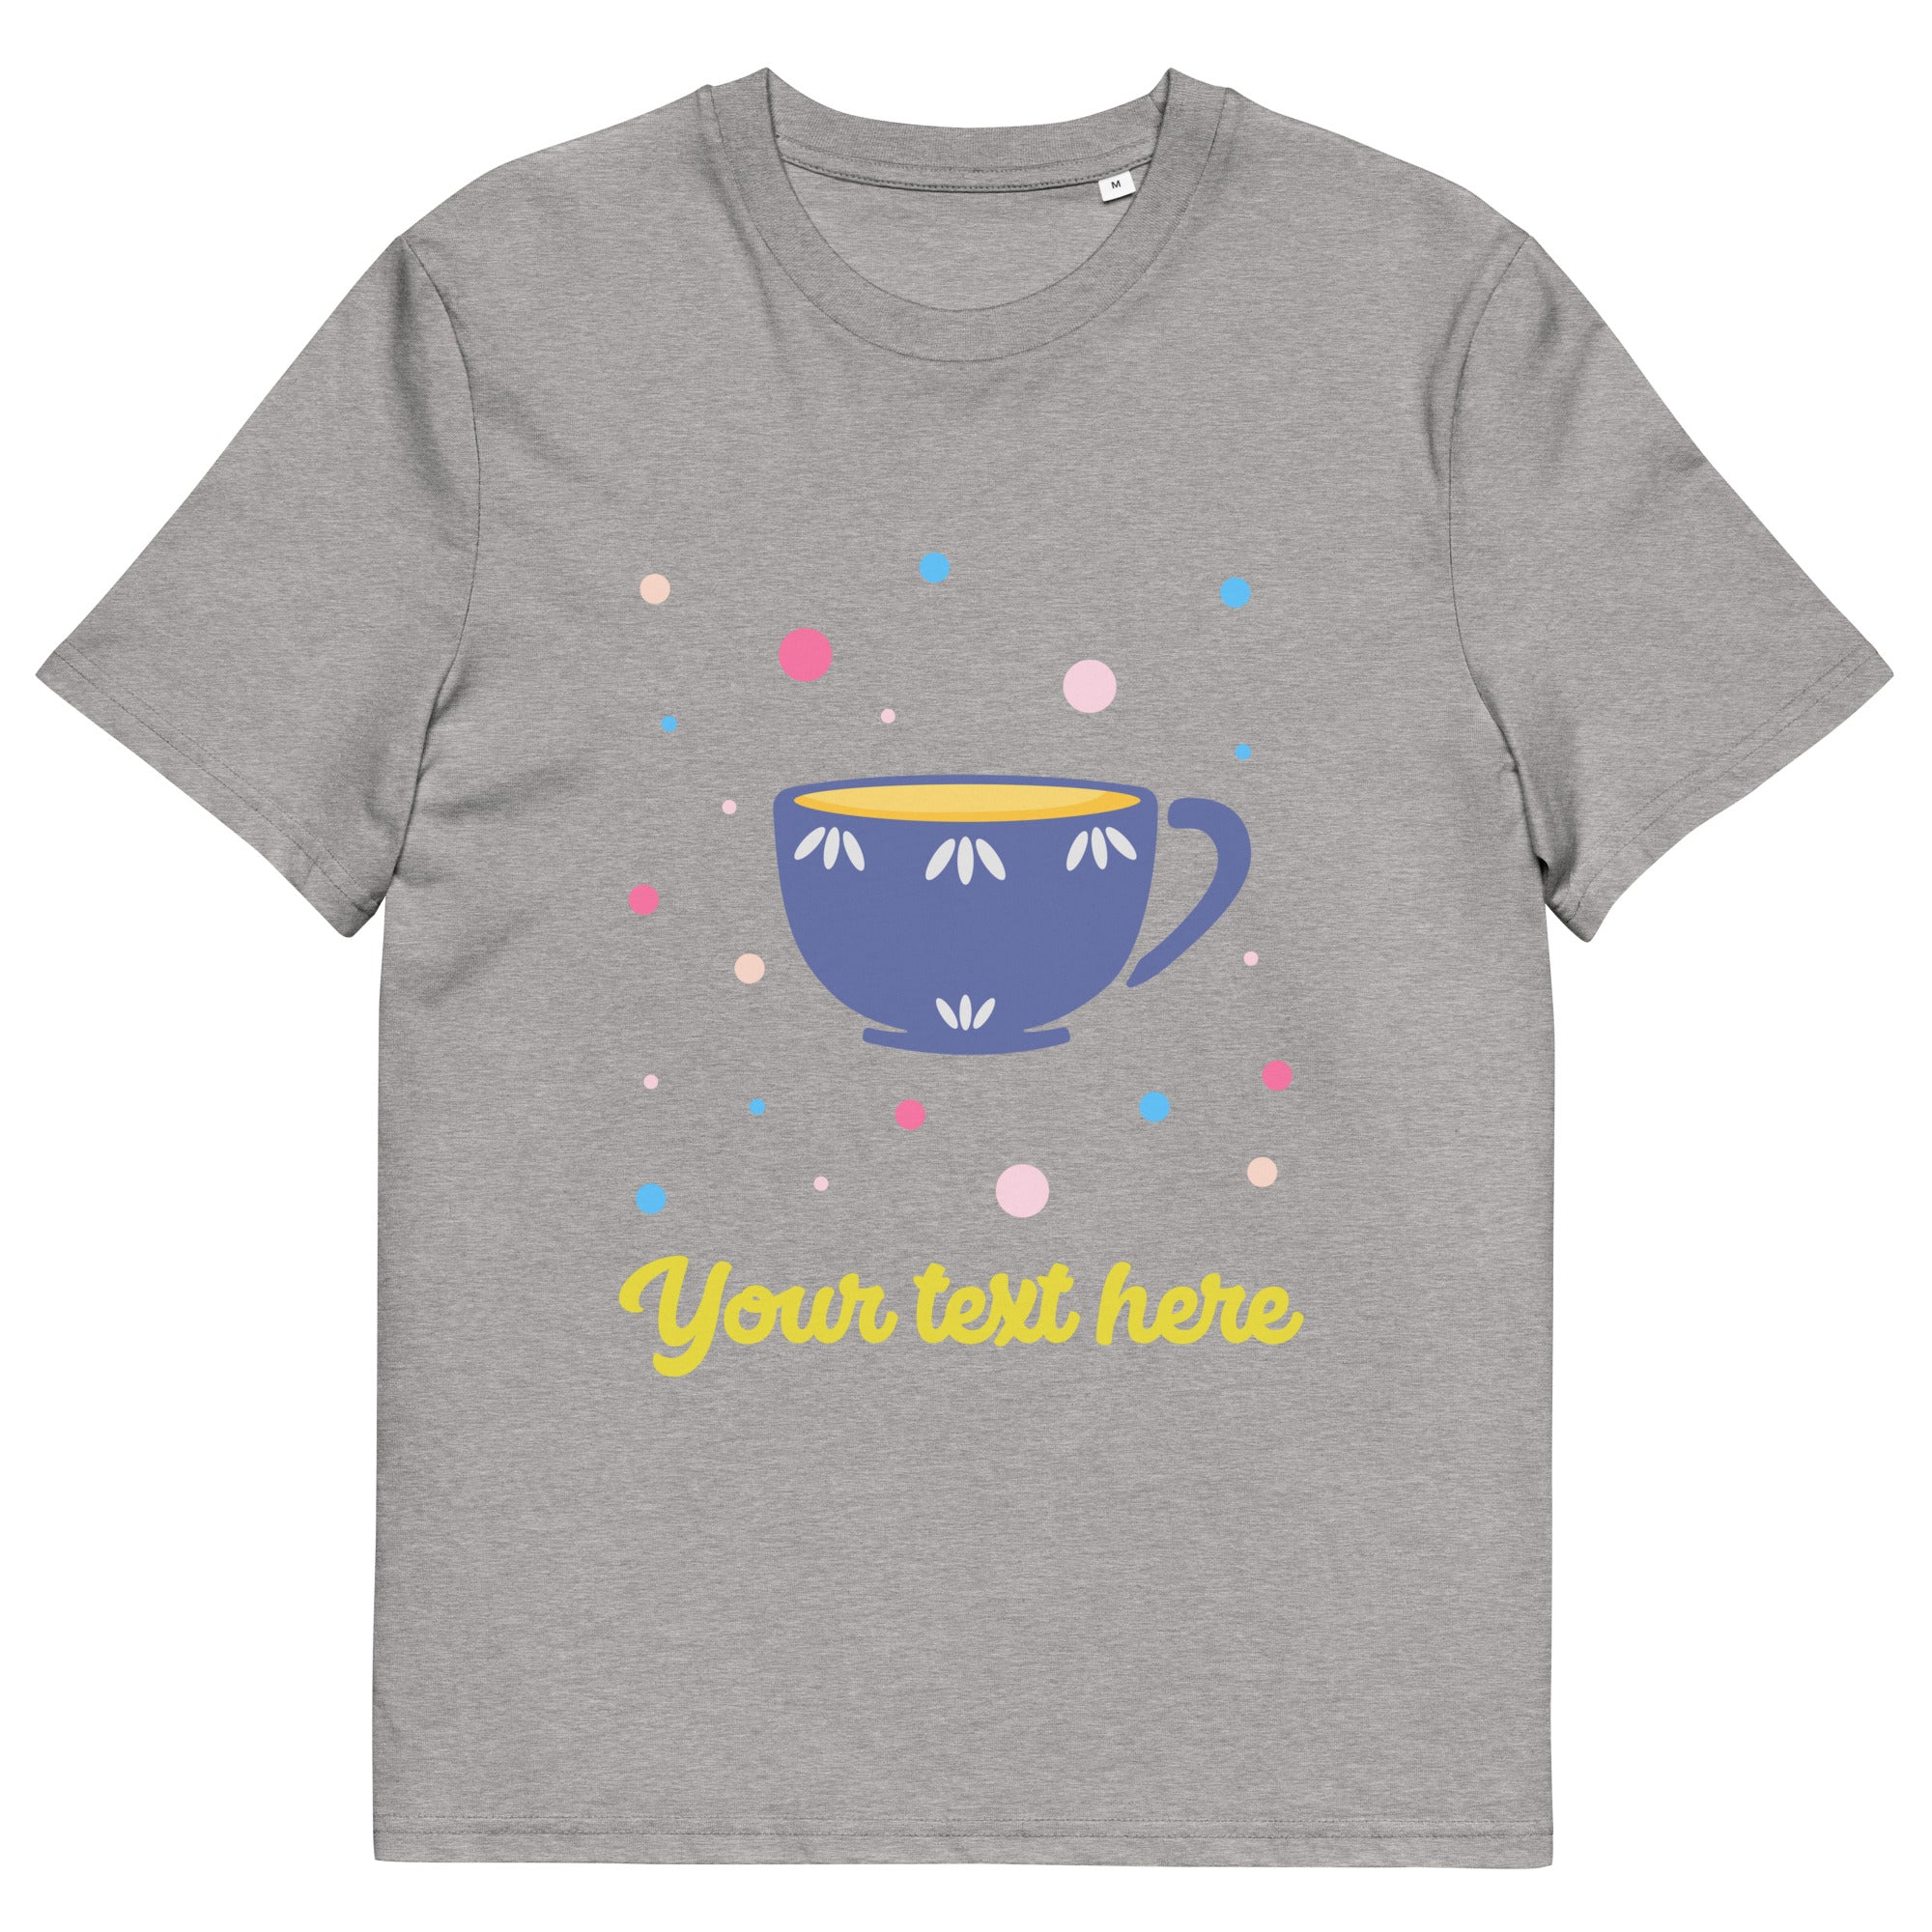 Personalised Custom Text - Organic Cotton Adults Unisex T-Shirt - London Doodles - Cup Of Tea - Heather Grey